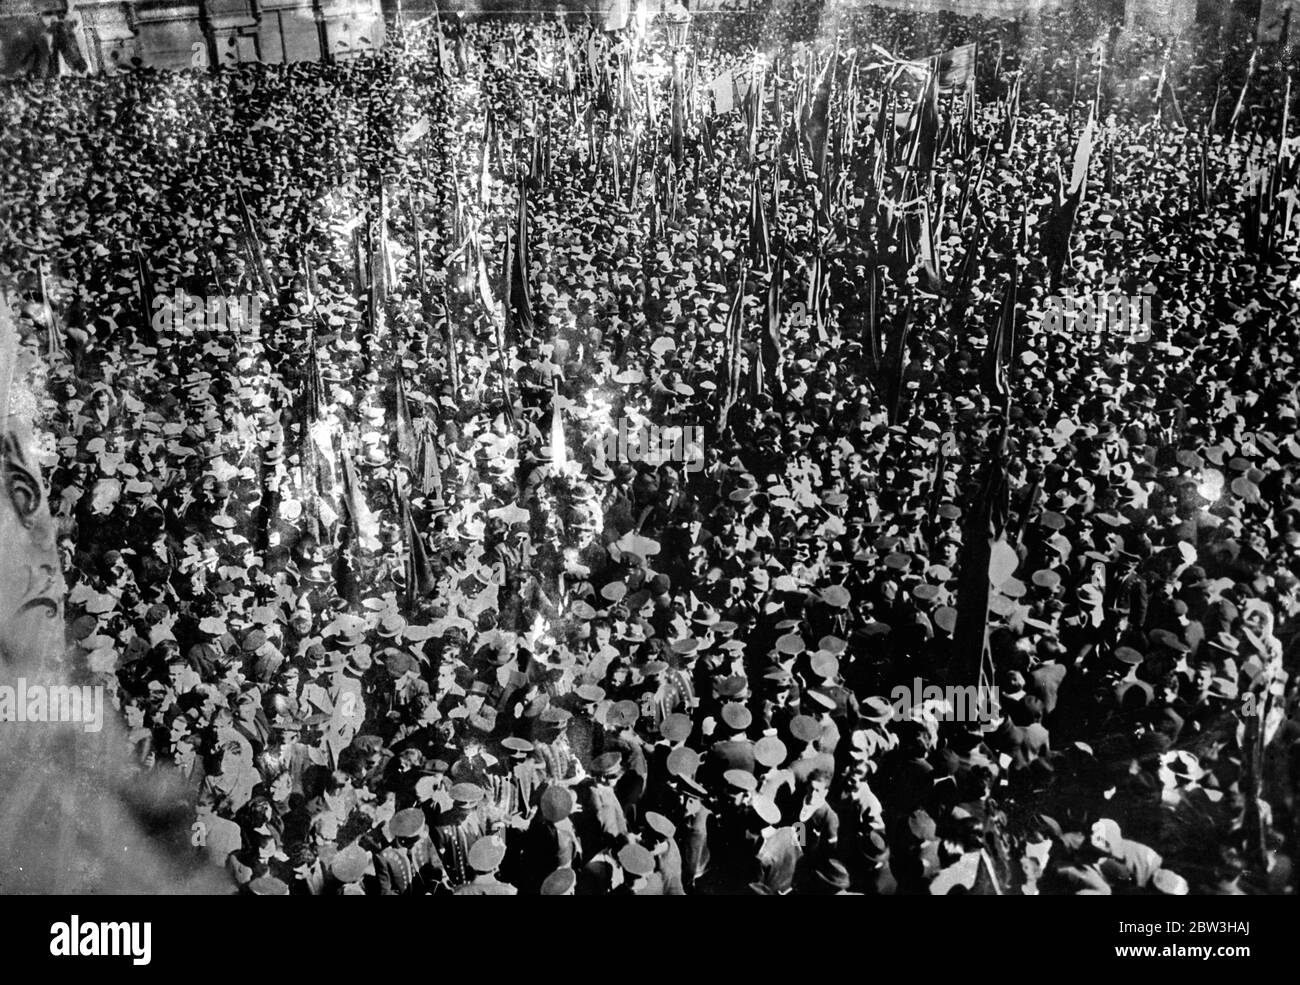 Multitude welcome companys in Barcelona , when he returns to Presidency after release from Gaol . Tens of thousands turned turned out in a Barcelona to greet Senor Companys , President of Catolonia , when he returned to the city to resume office after his release from Gaol . Senor Companys was sentenced to 30 years imprisonment for his part in the Catalonian rebellion of 1934 , but was released under the amnesty when the new Socialist Government took office . Photo shows , the multitude in the Plaza de la Republica , Barcelona , when Senor Companys returned . 3 March 1936 Stock Photo